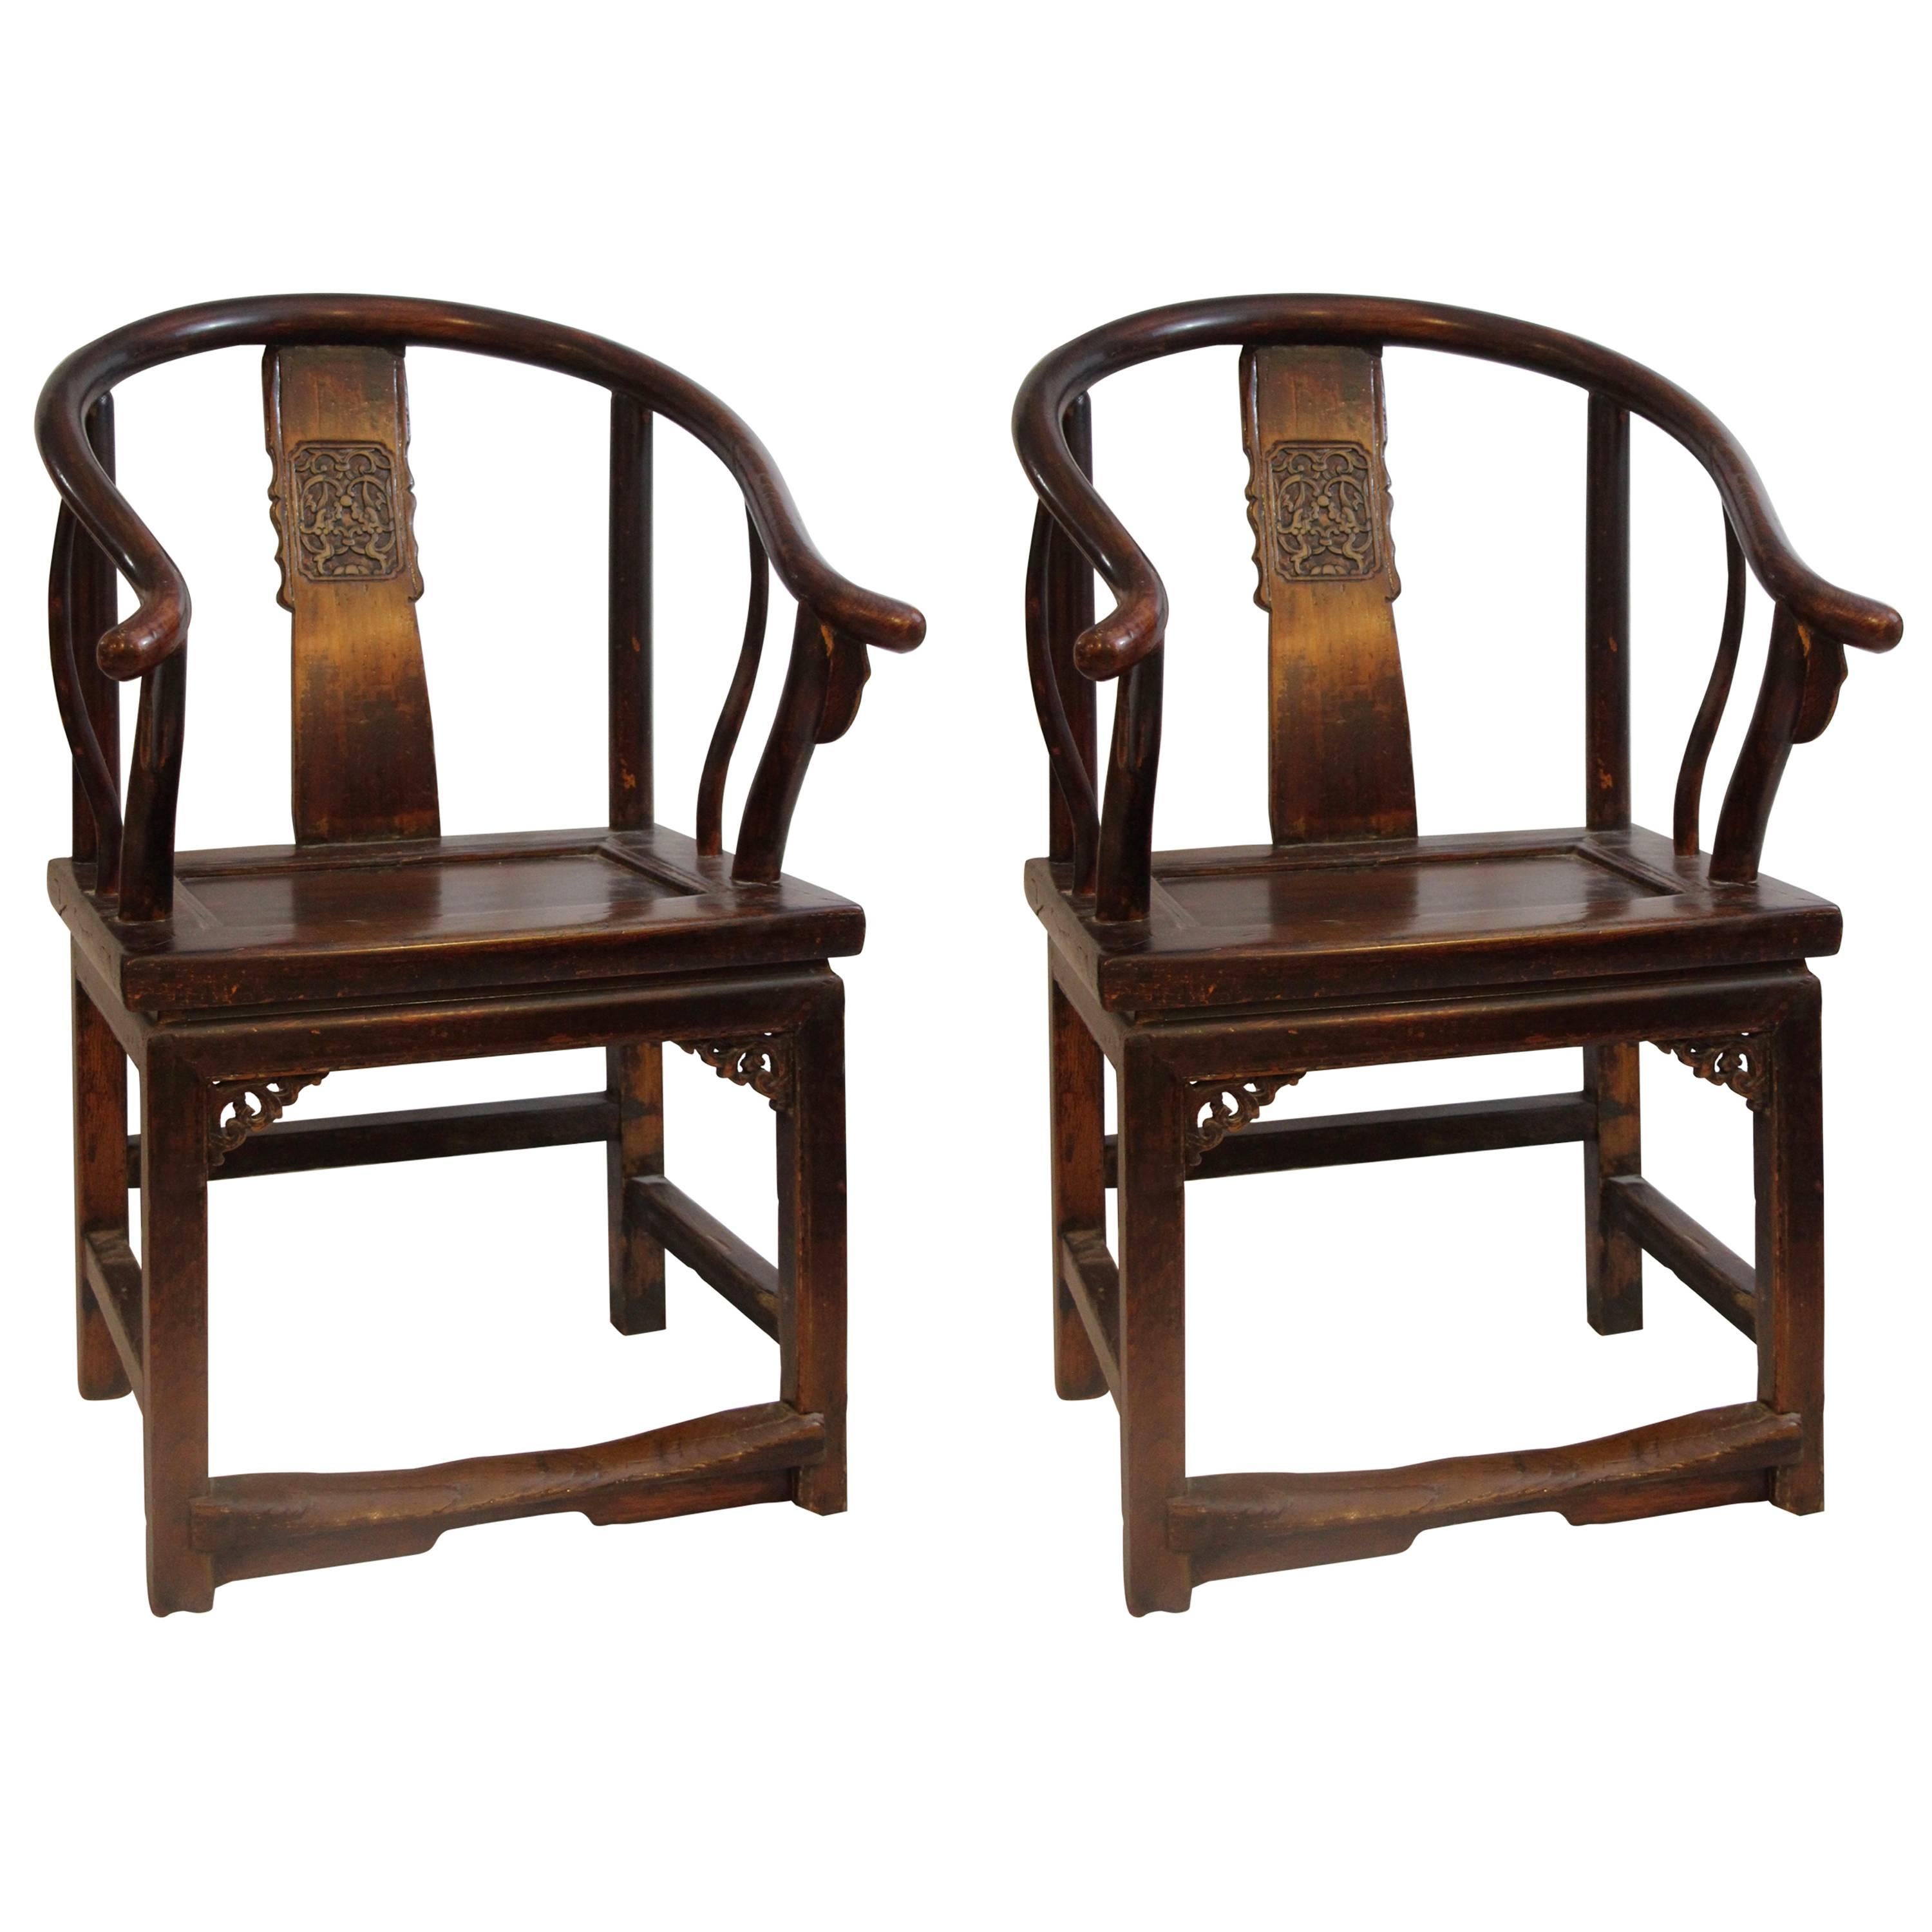 Pair of Horse Shoe Back Armchairs, China, circa 1900 For Sale